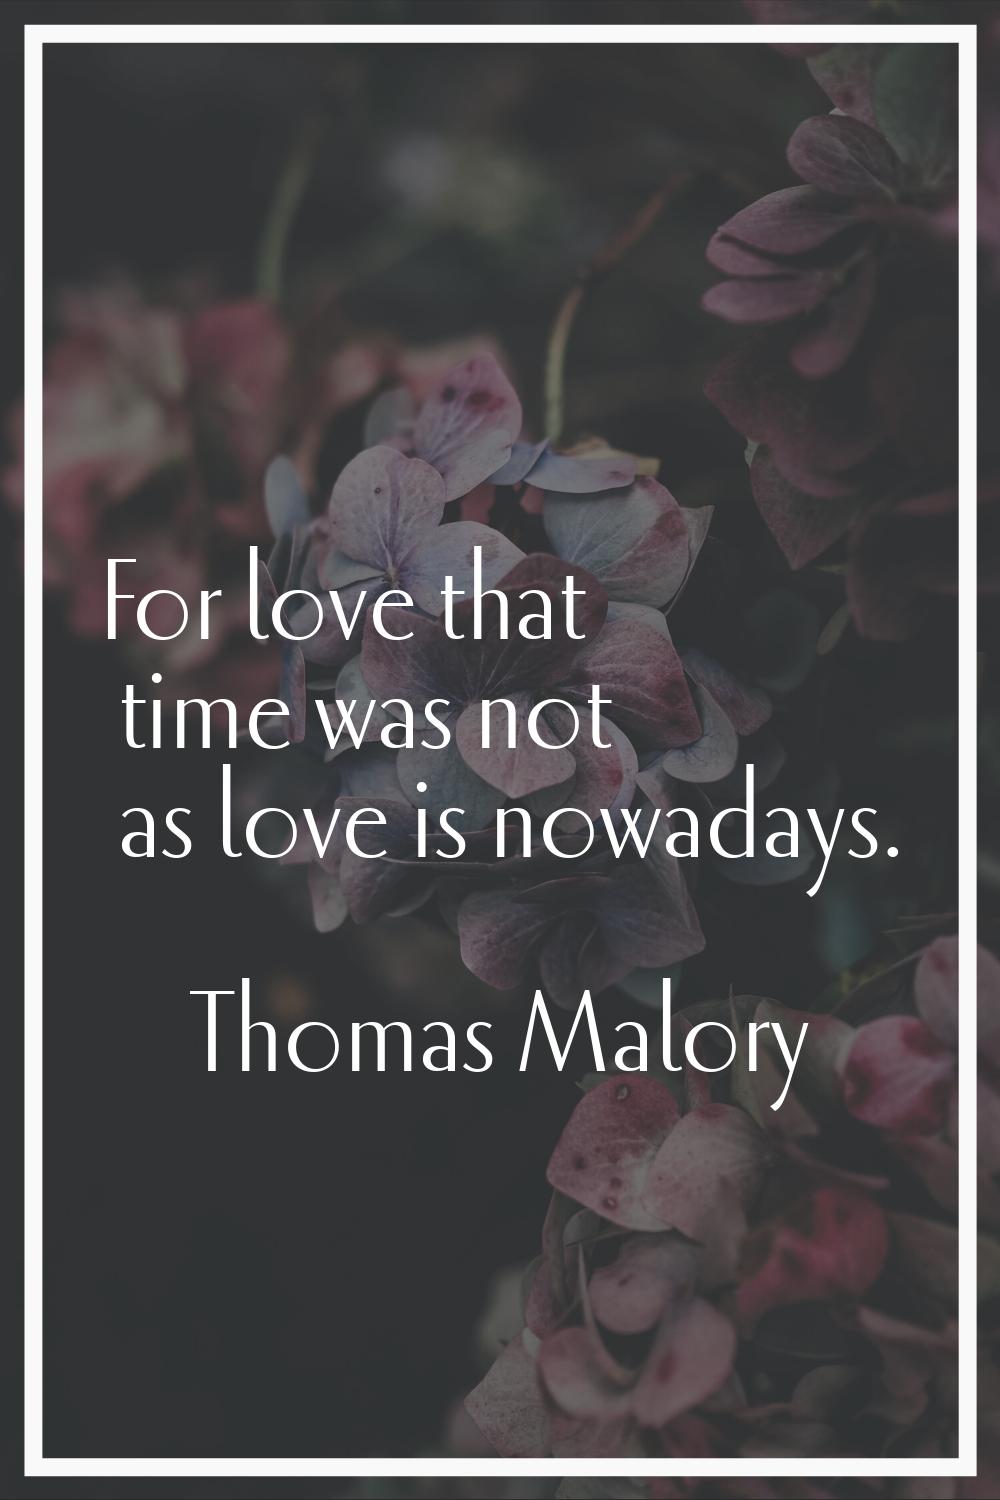 For love that time was not as love is nowadays.